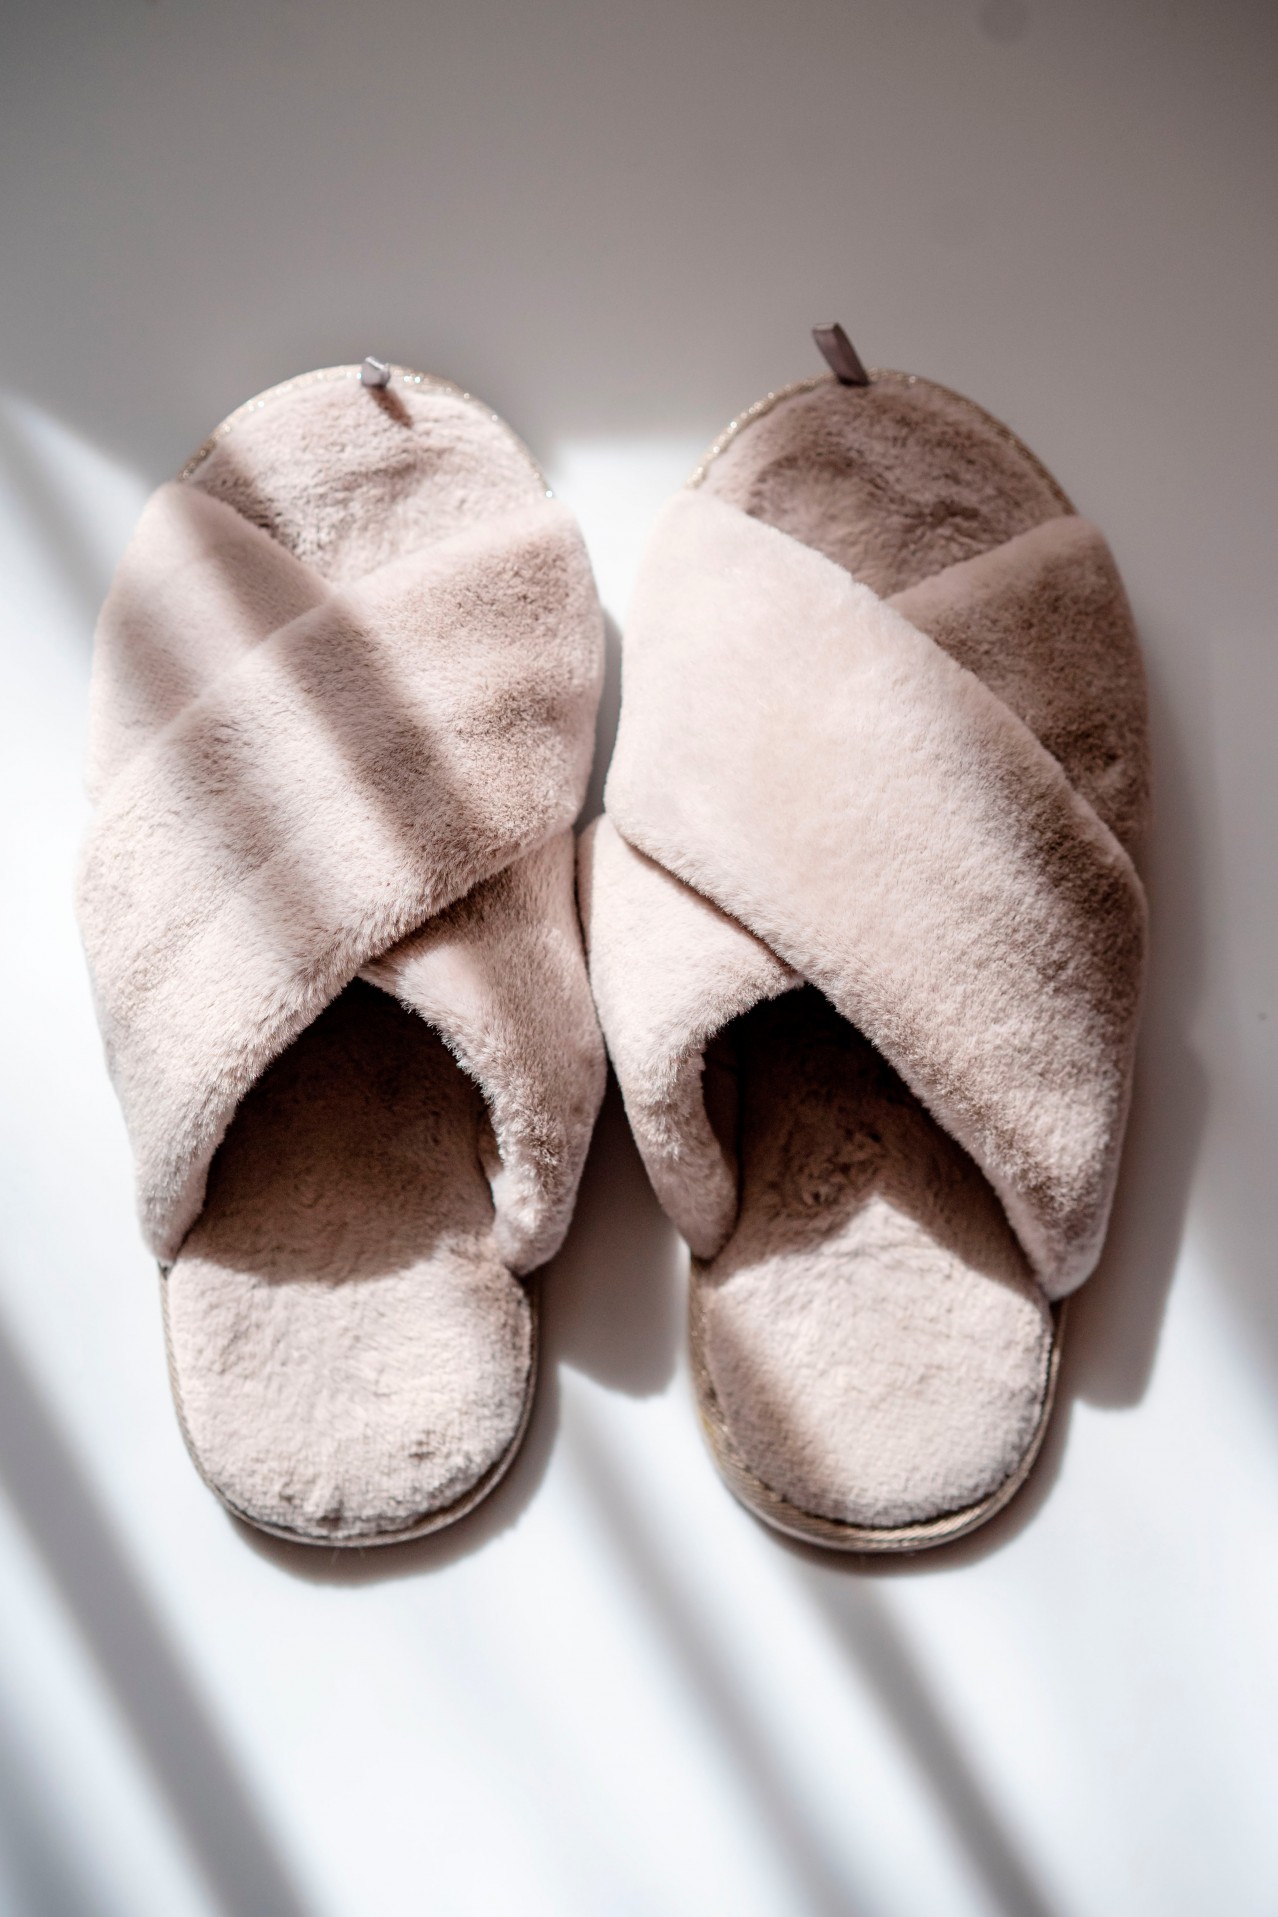 Pair of fluffy slippers under shadows